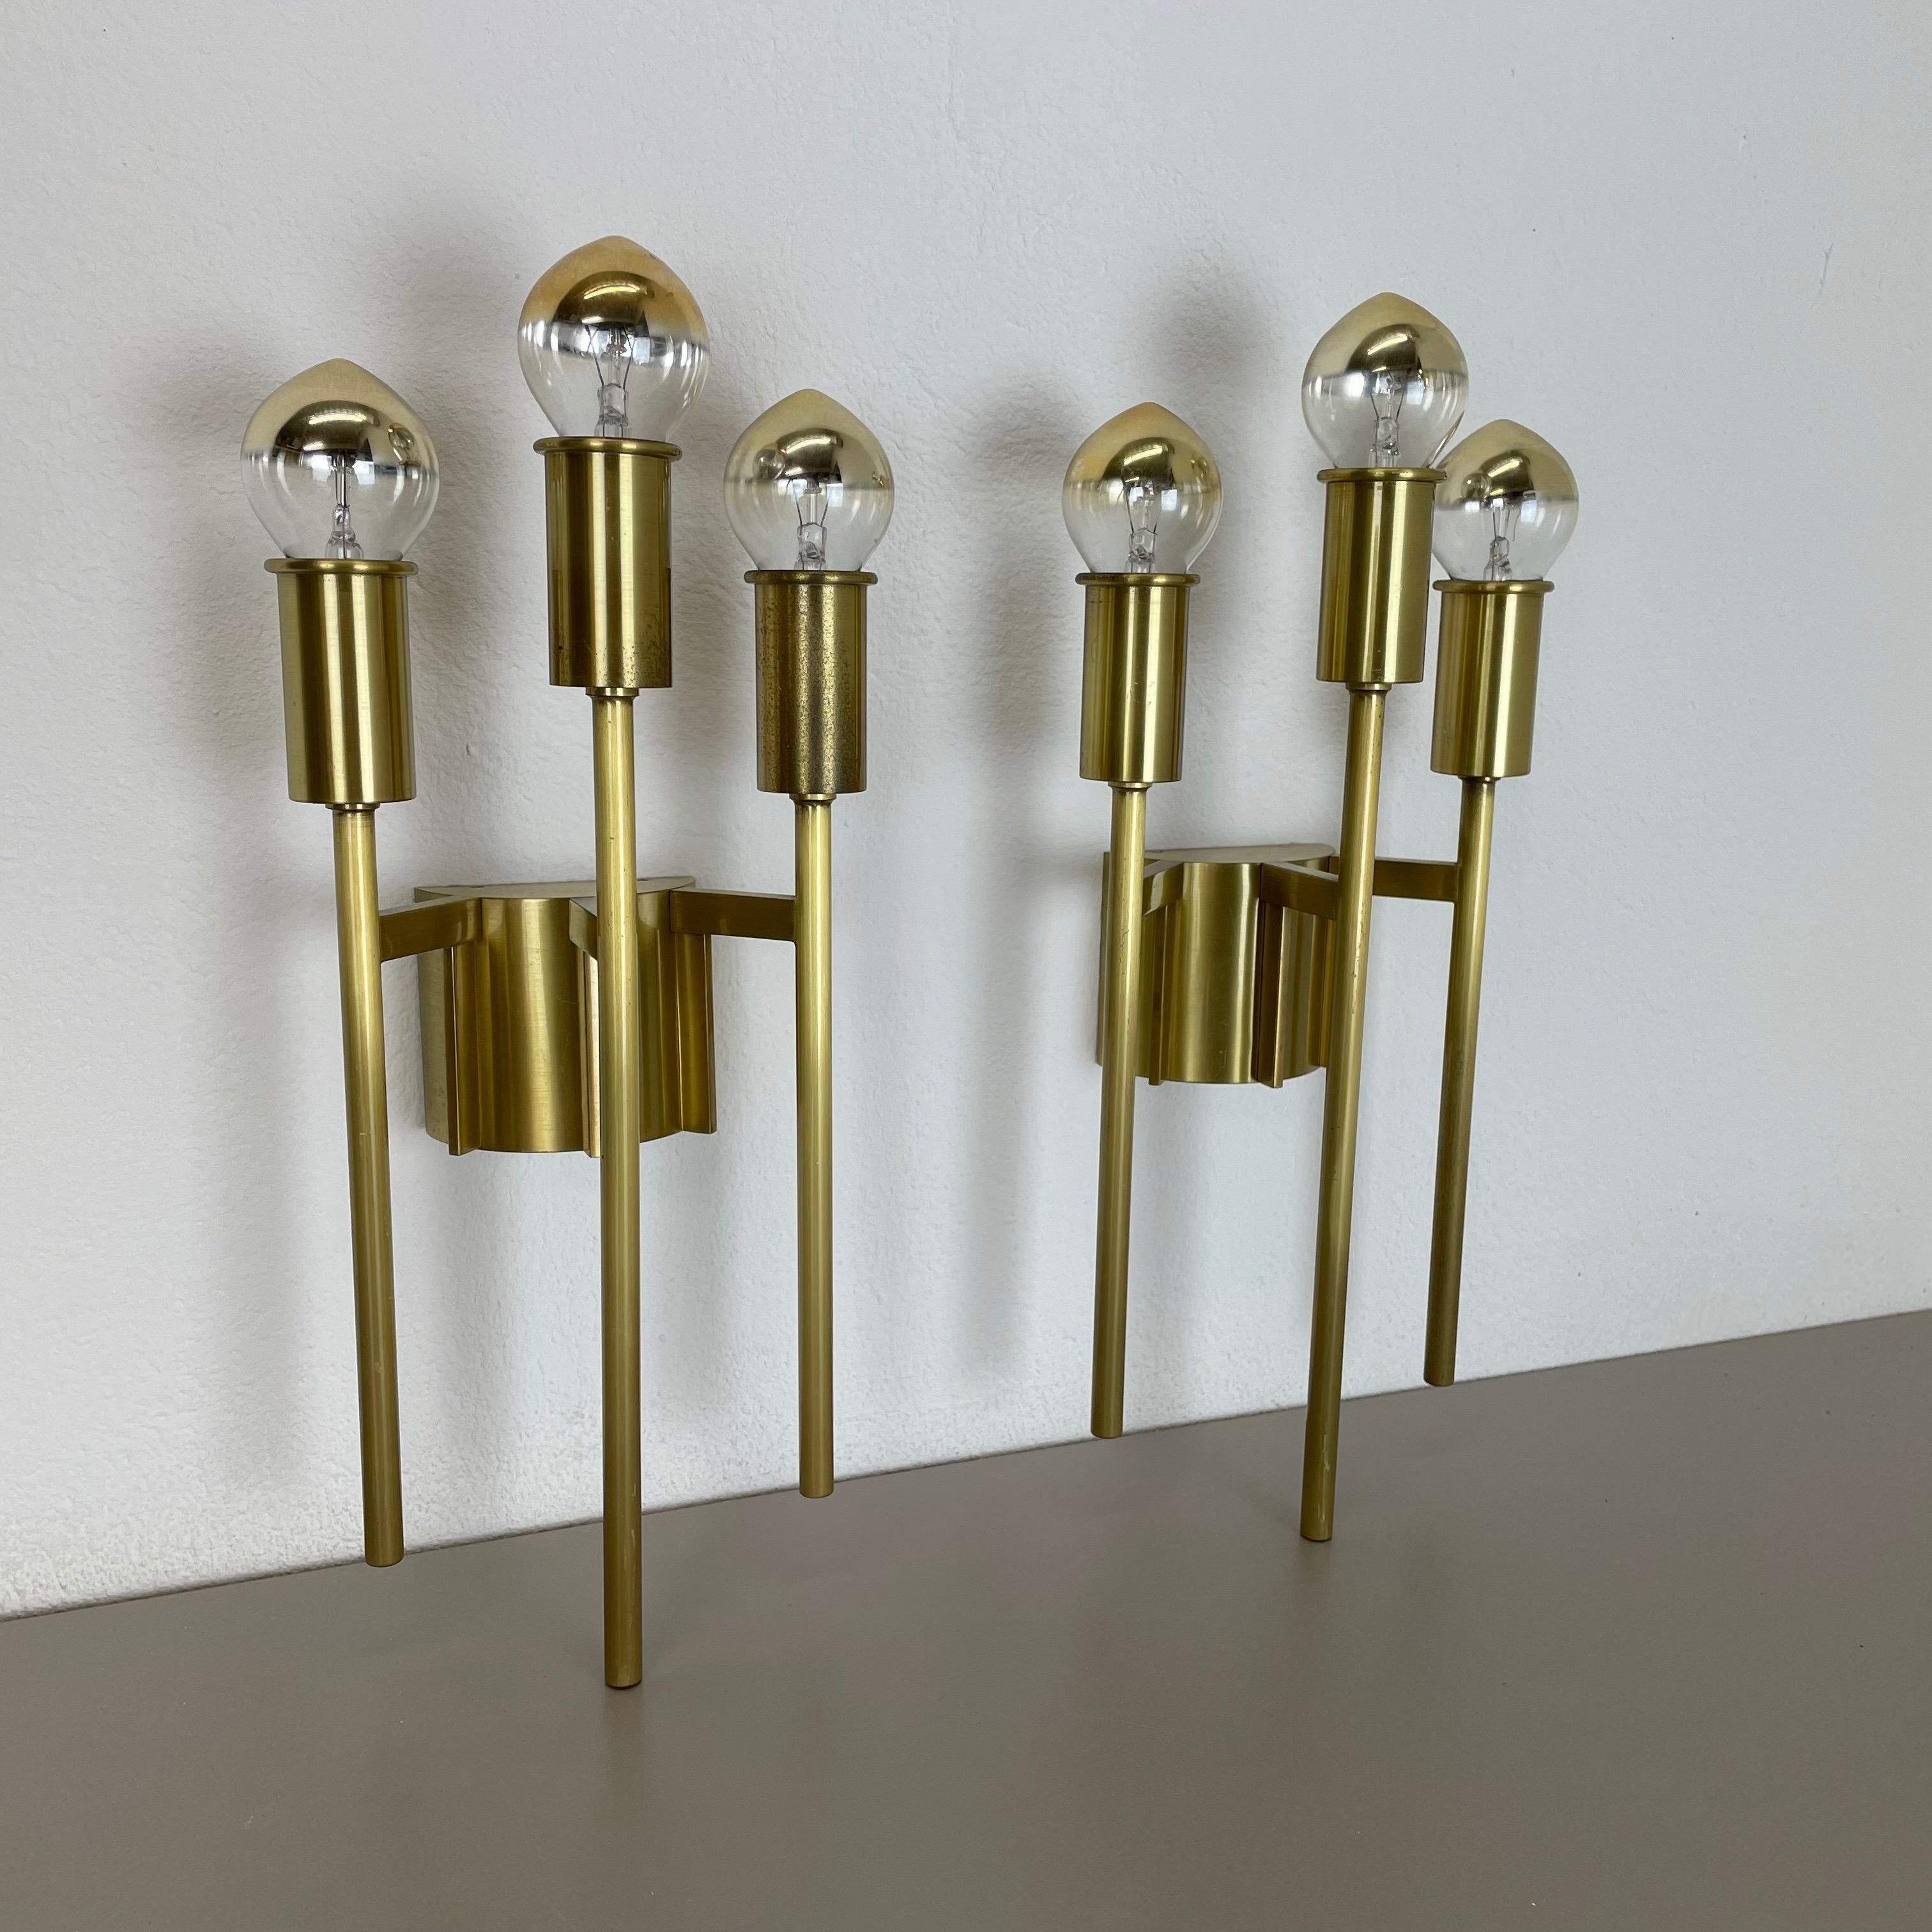 Article:

Wall light, set of 2 


Origin:

Italy in the manner of Stilnovo, Gio Ponti



Age:

1970s



This modernist light set was produced in Italy in the 1970s in Italy. It is made of brass and features a very unique and unusual Brutalist form